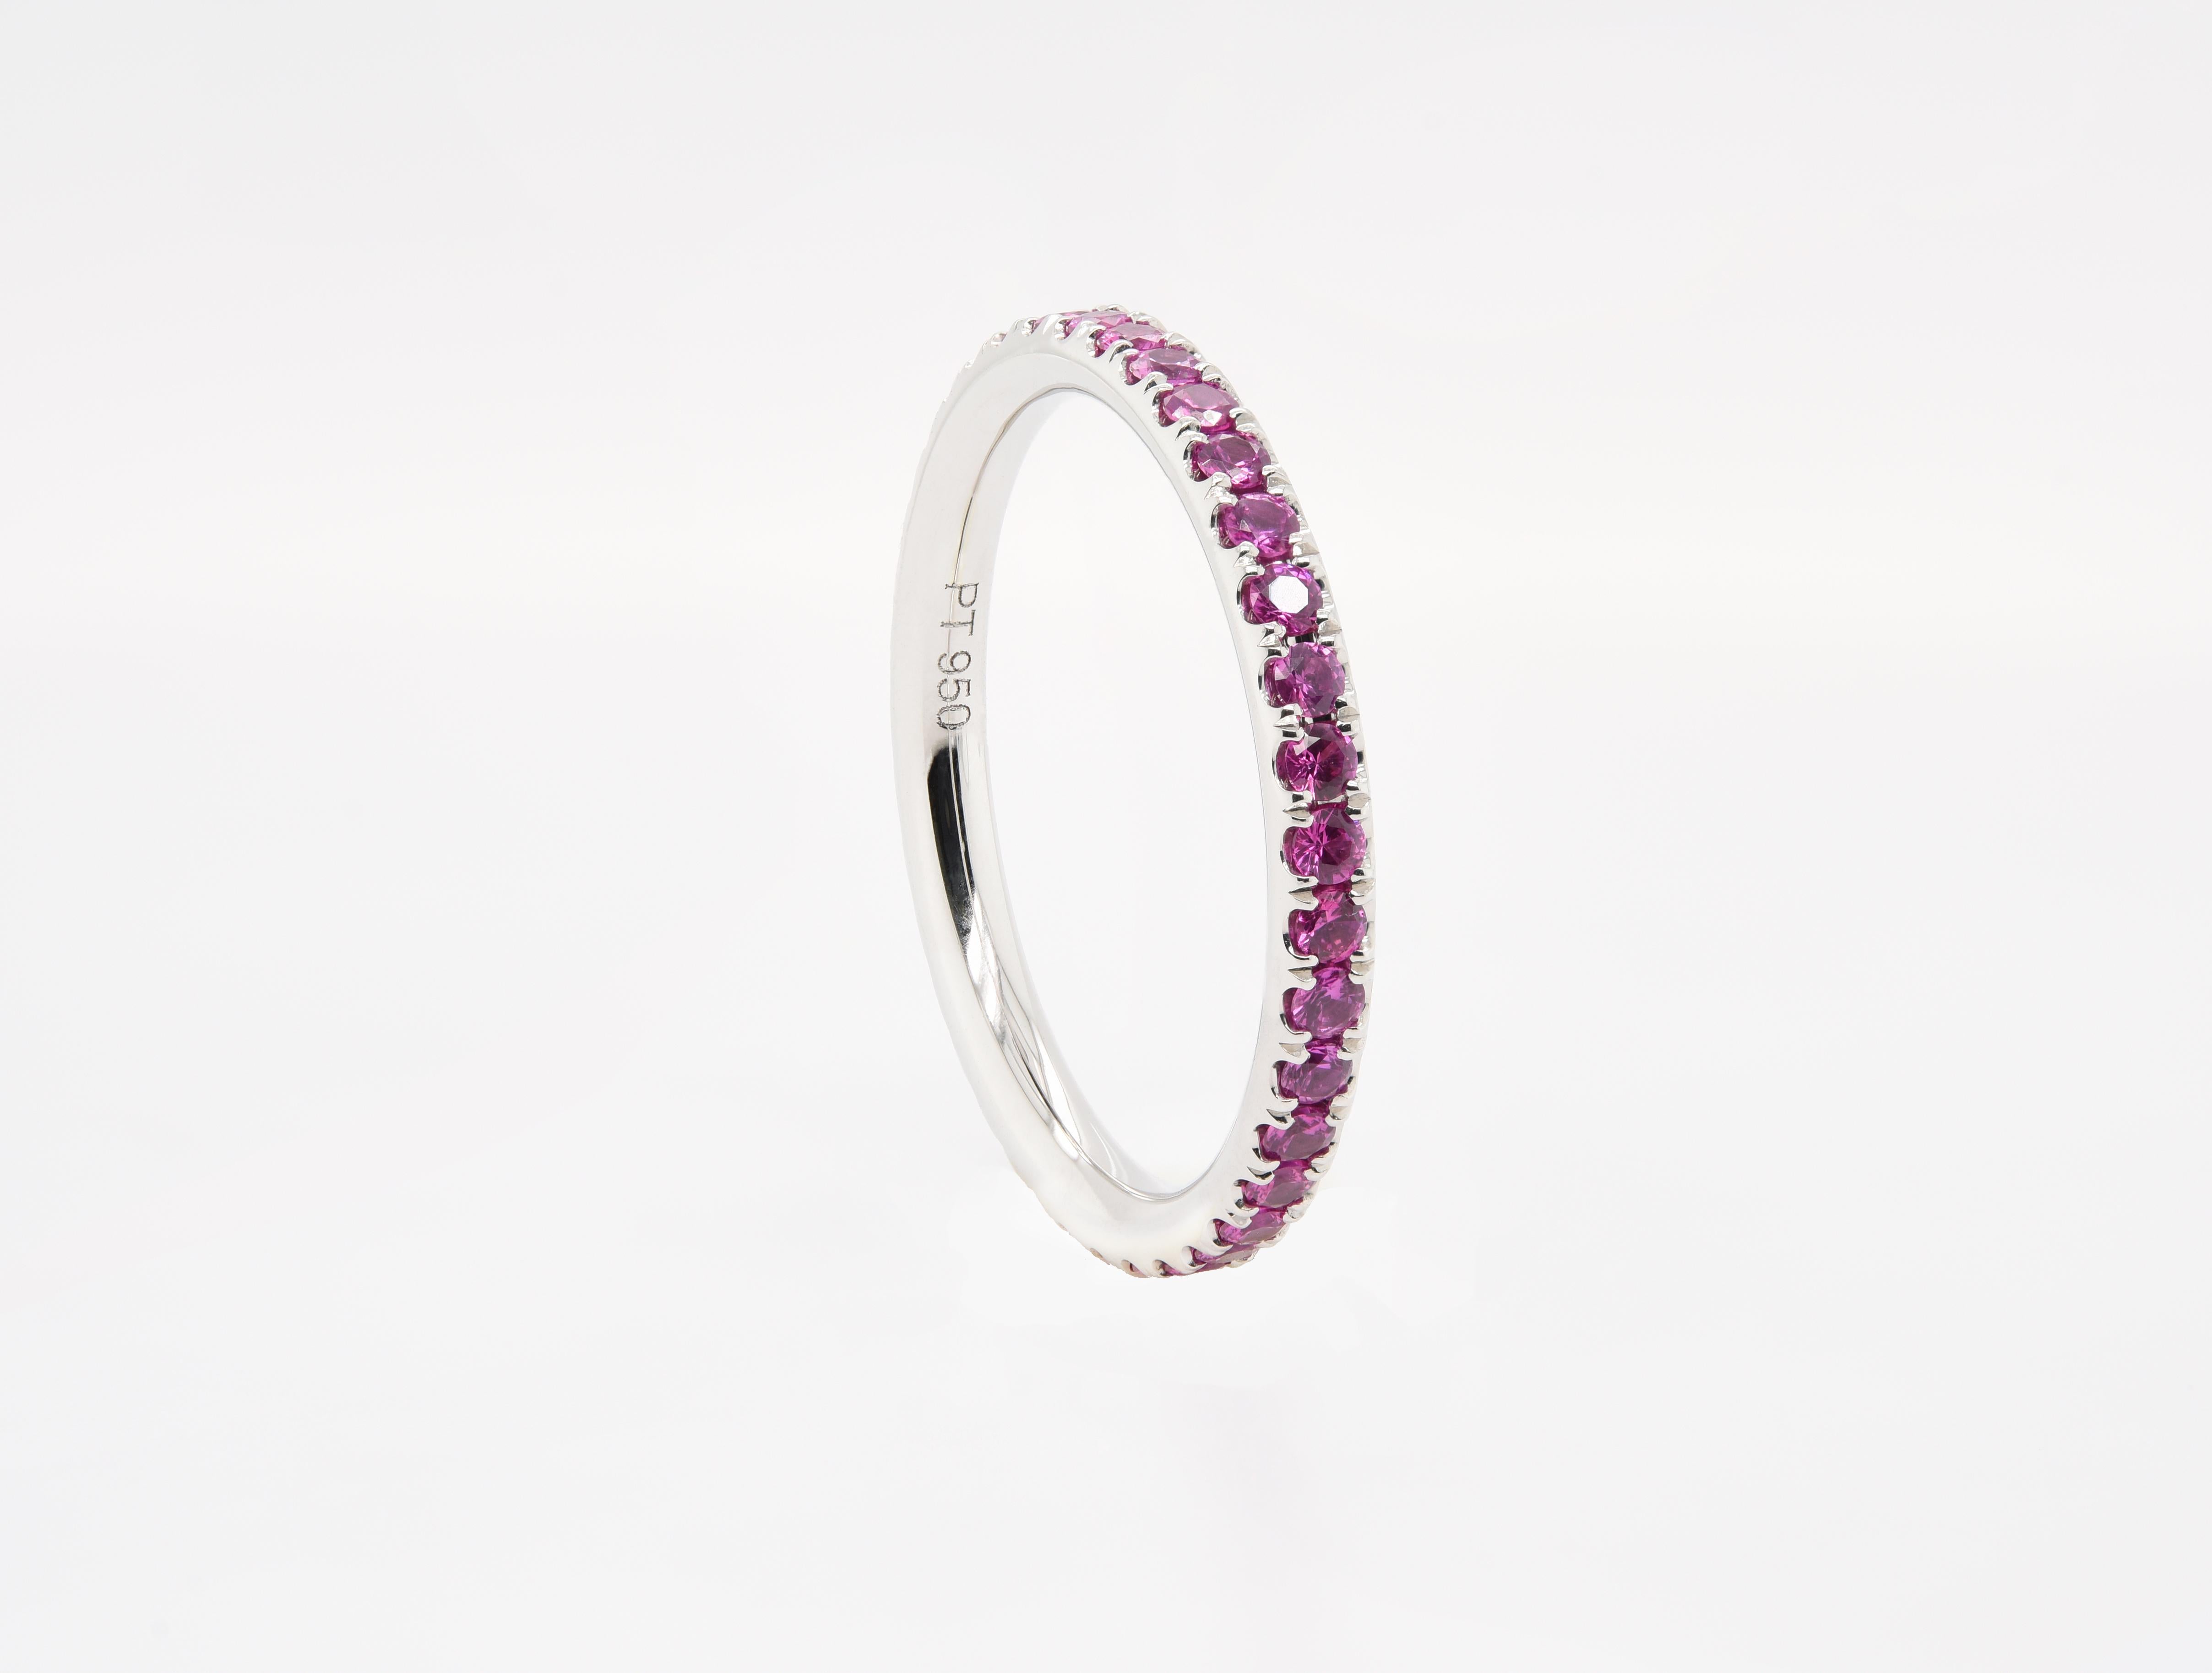 JAG New York Eternity Band with Your Choice of Diamonds and Gemstones For Sale 6